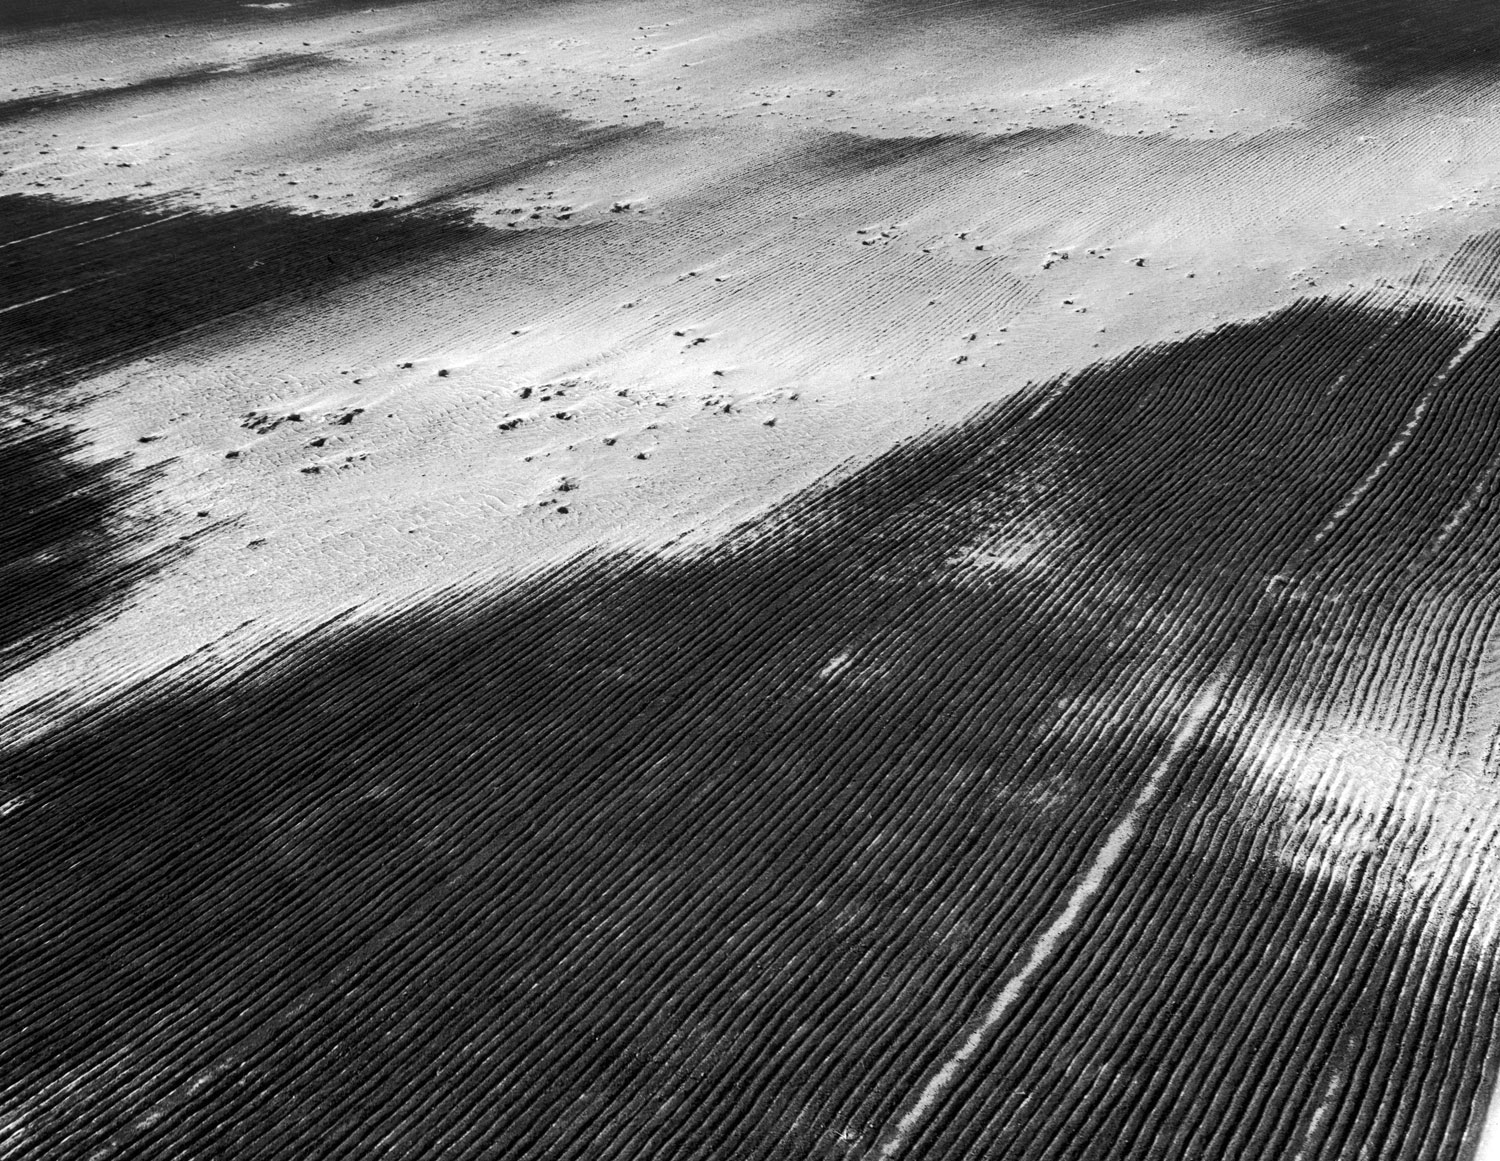 Antidust measure of furrowing land, taken by a conservation-minded farmer in Baca County, goes to naught when neighbor's unfurrowed land blows across his farm, killing crop of winter wheat.